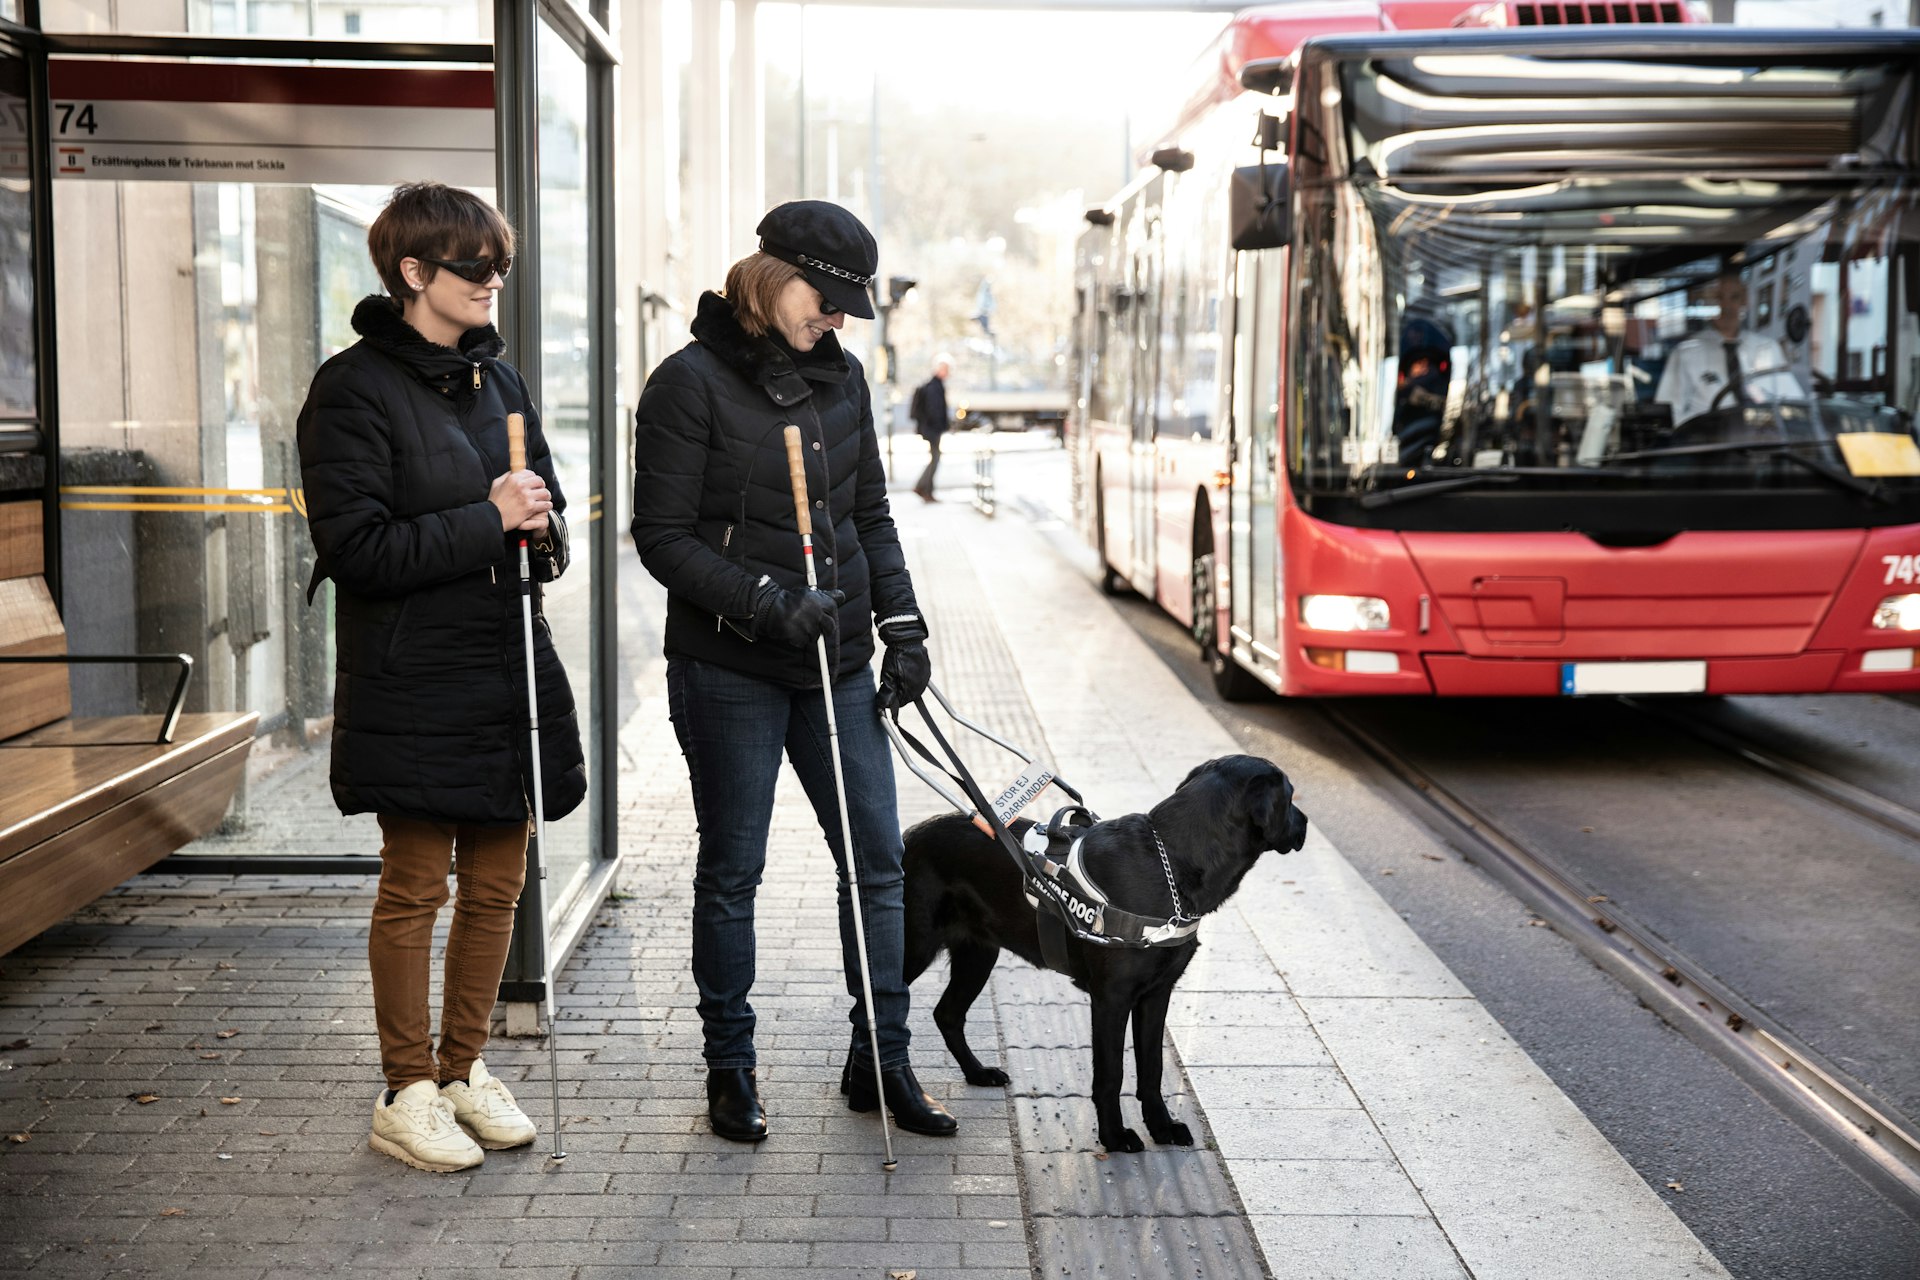 Guide dog leading visually impaired women towards bus in city